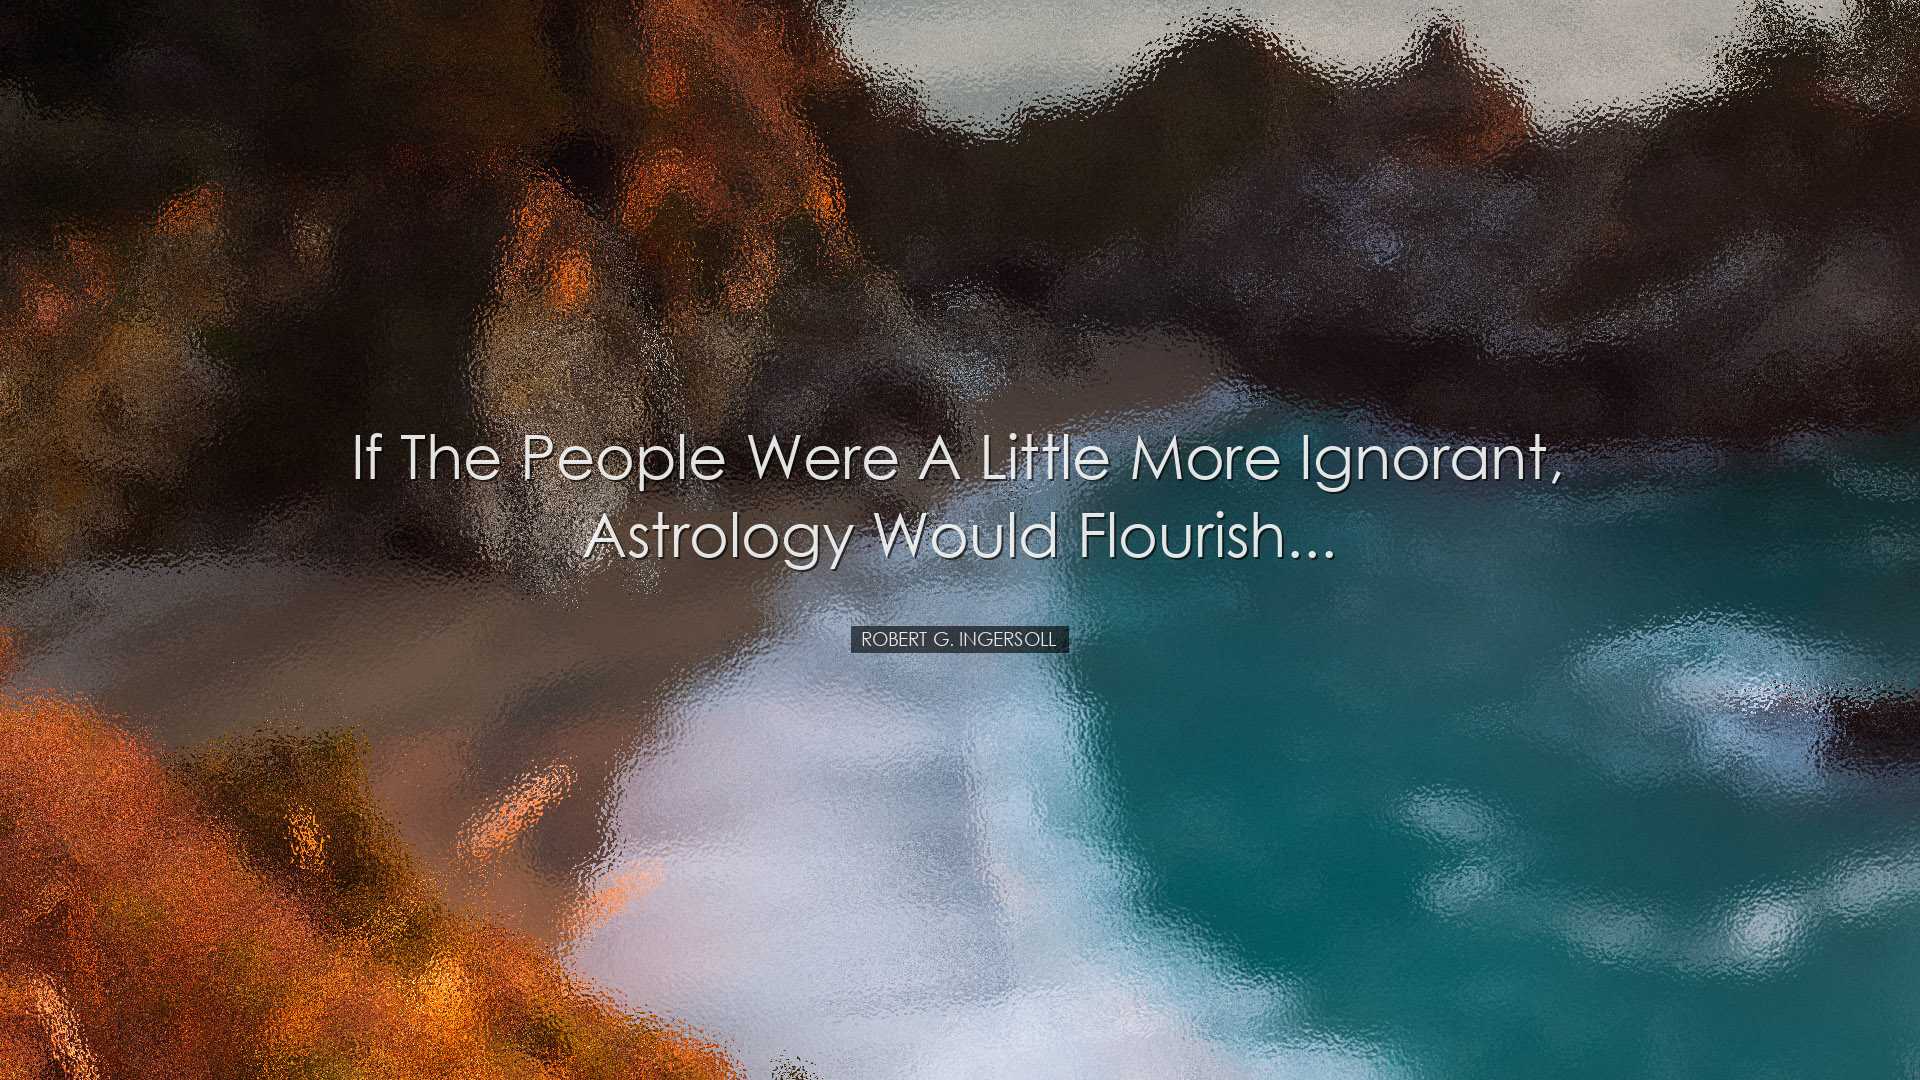 If the people were a little more ignorant, astrology would flouris